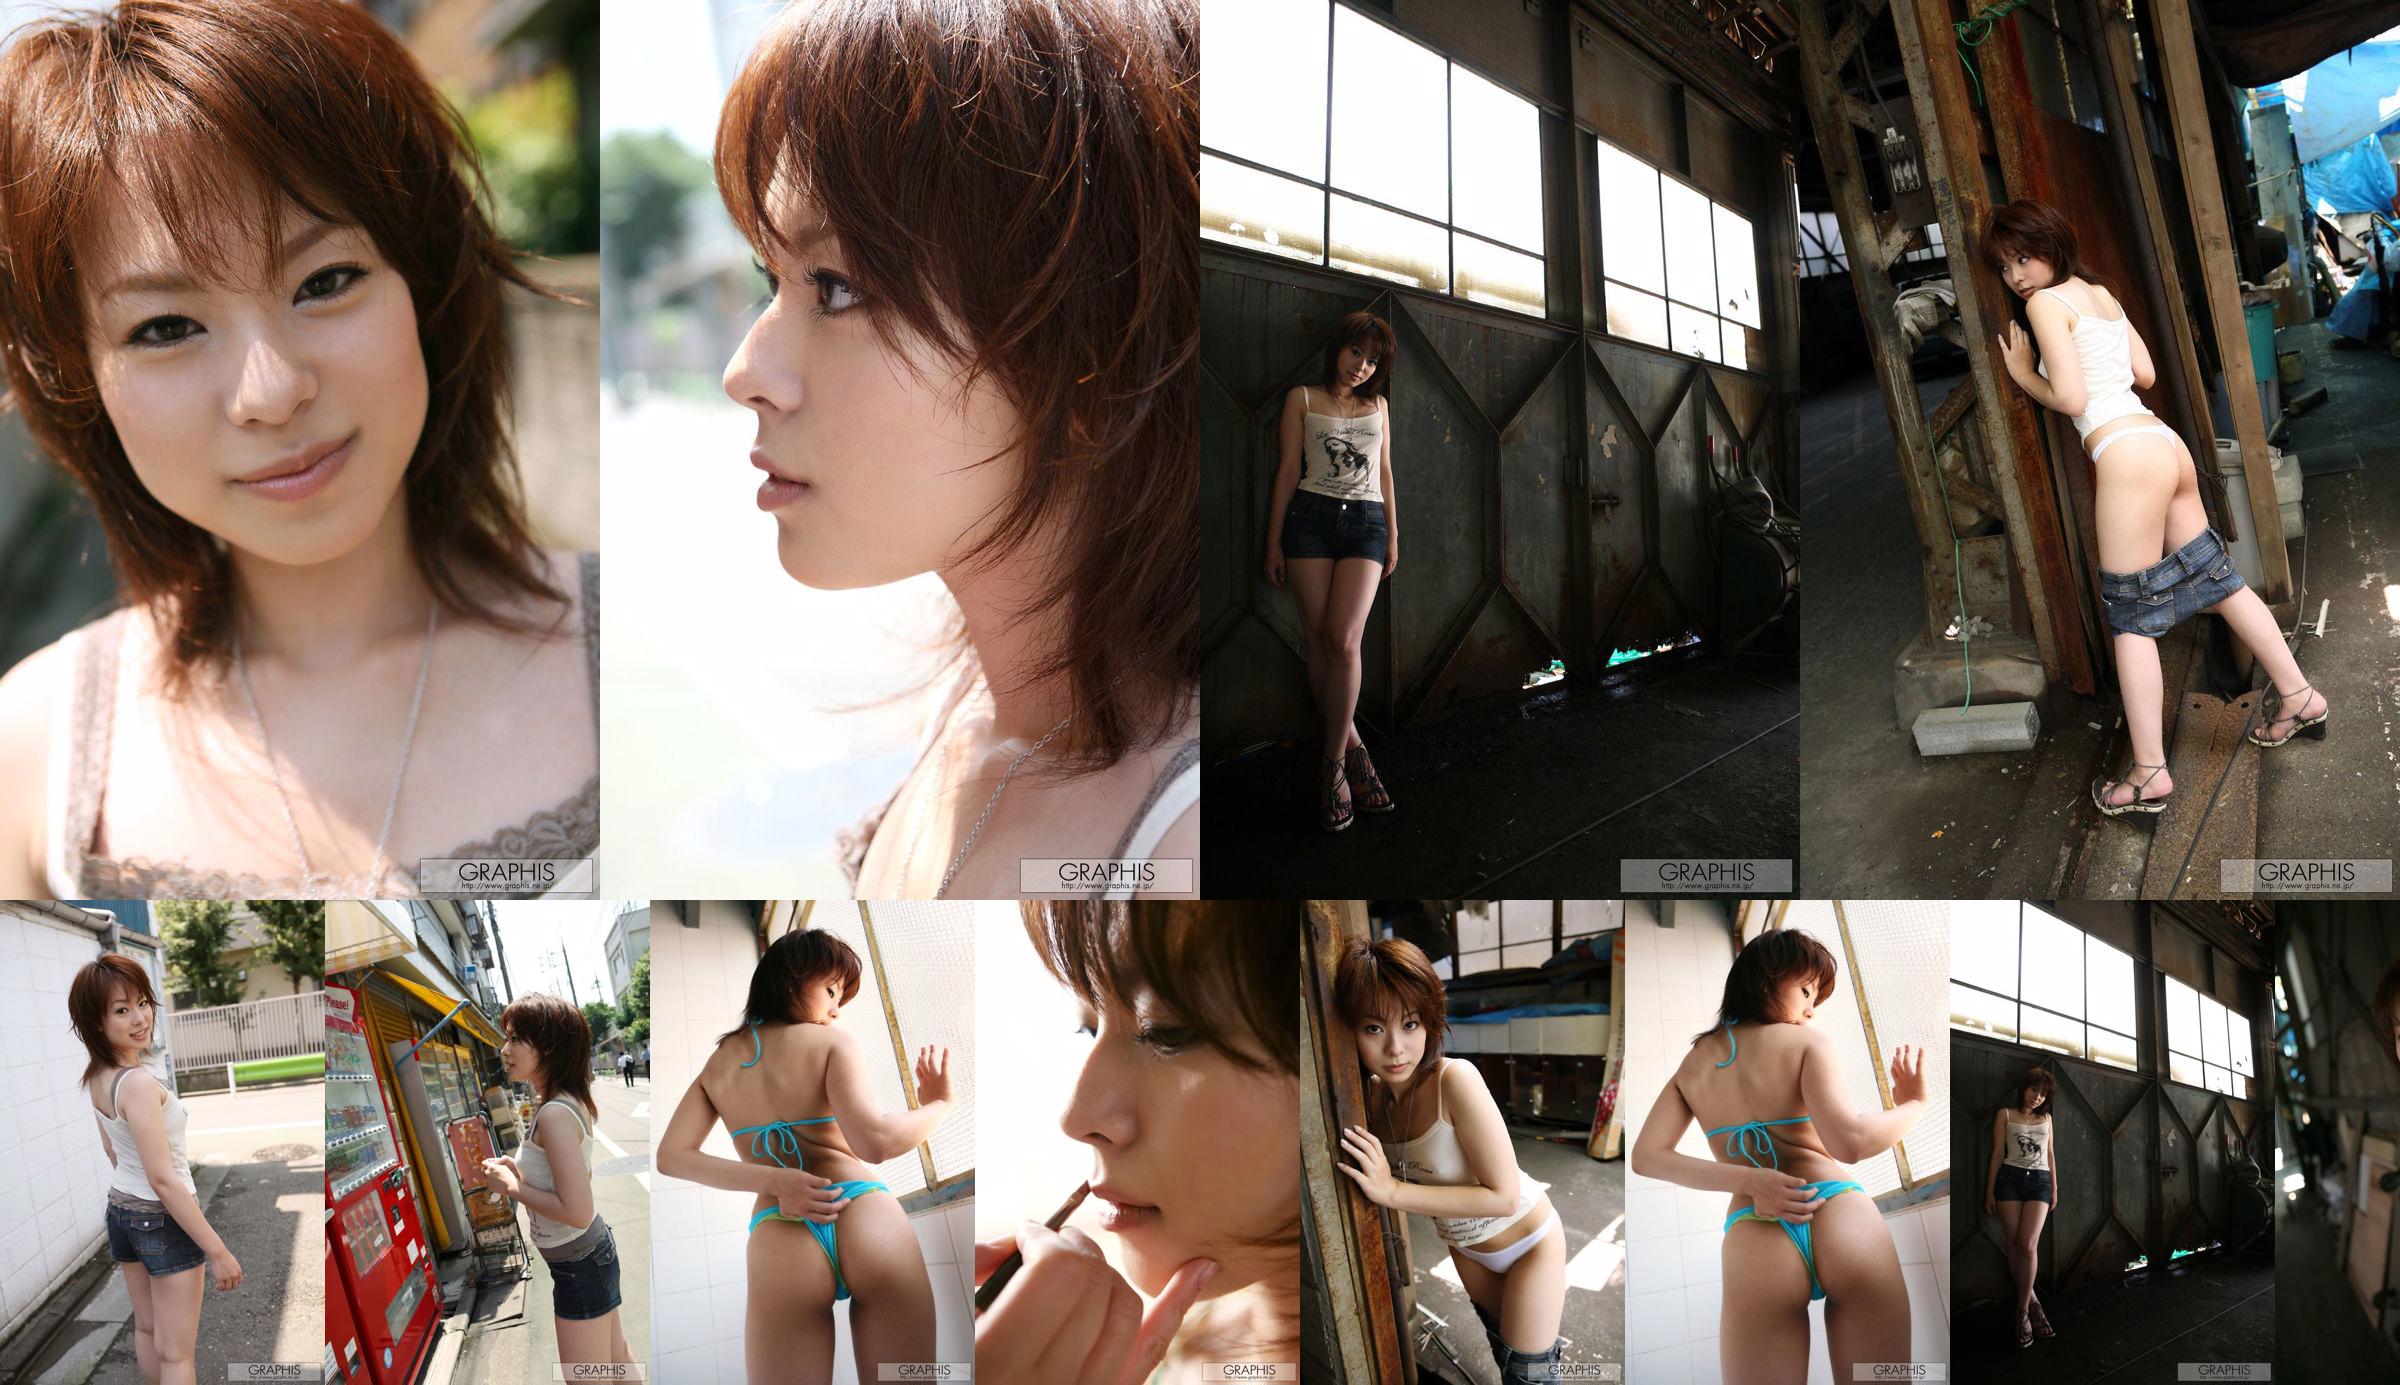 Mina Manabe Mina Manabe [Graphis] First Gravure First Take Off Con gái No.6d1338 Trang 3